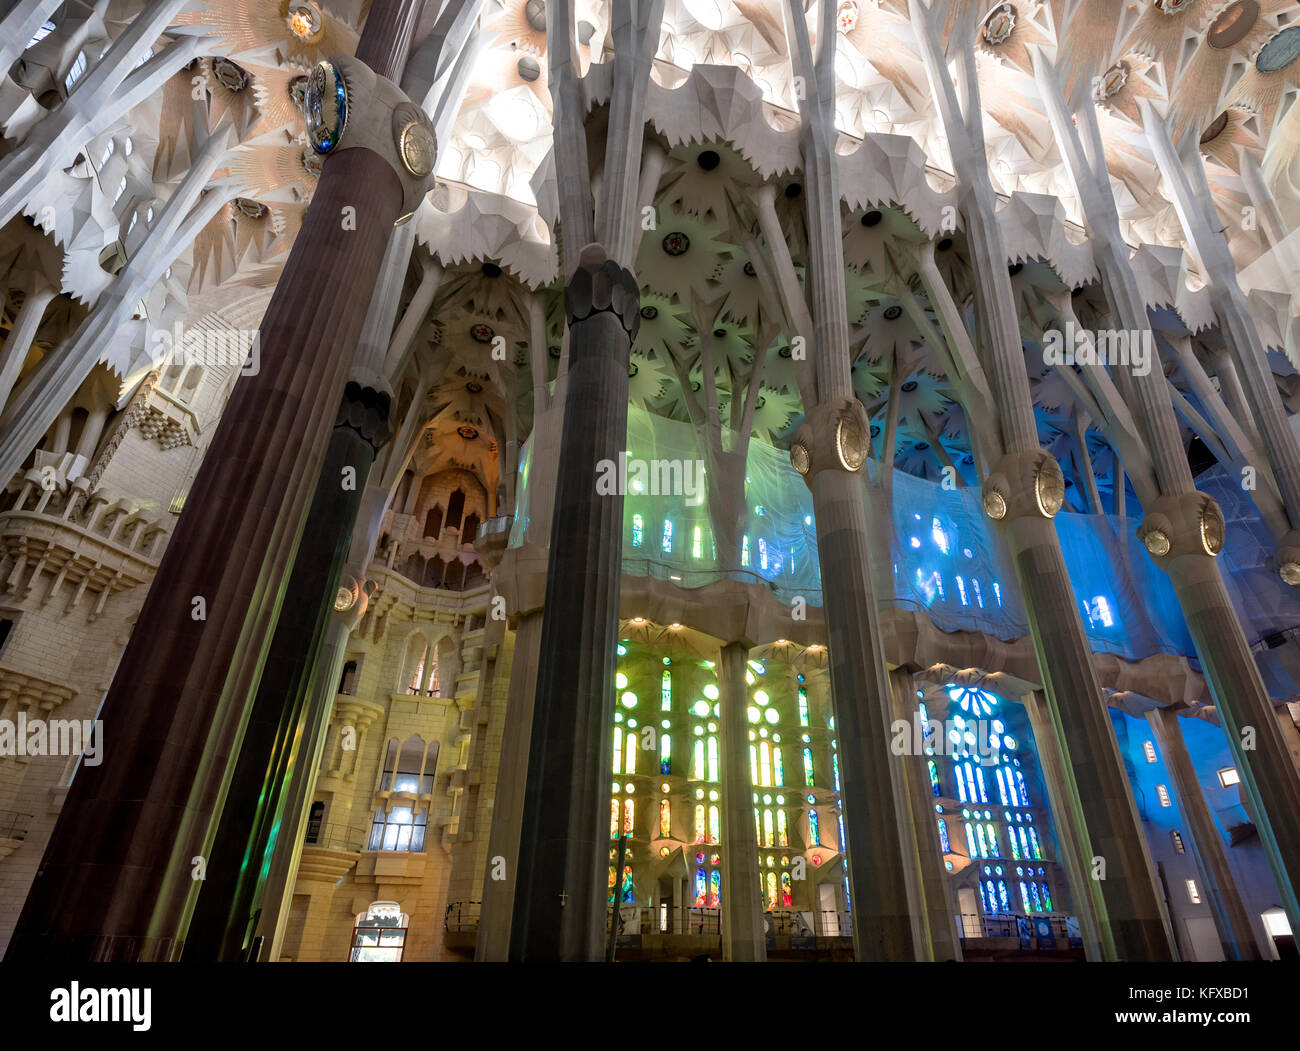 Interior architectural columns and the stained glass windows of the Sagrada Familia in Barcelona Stock Photo